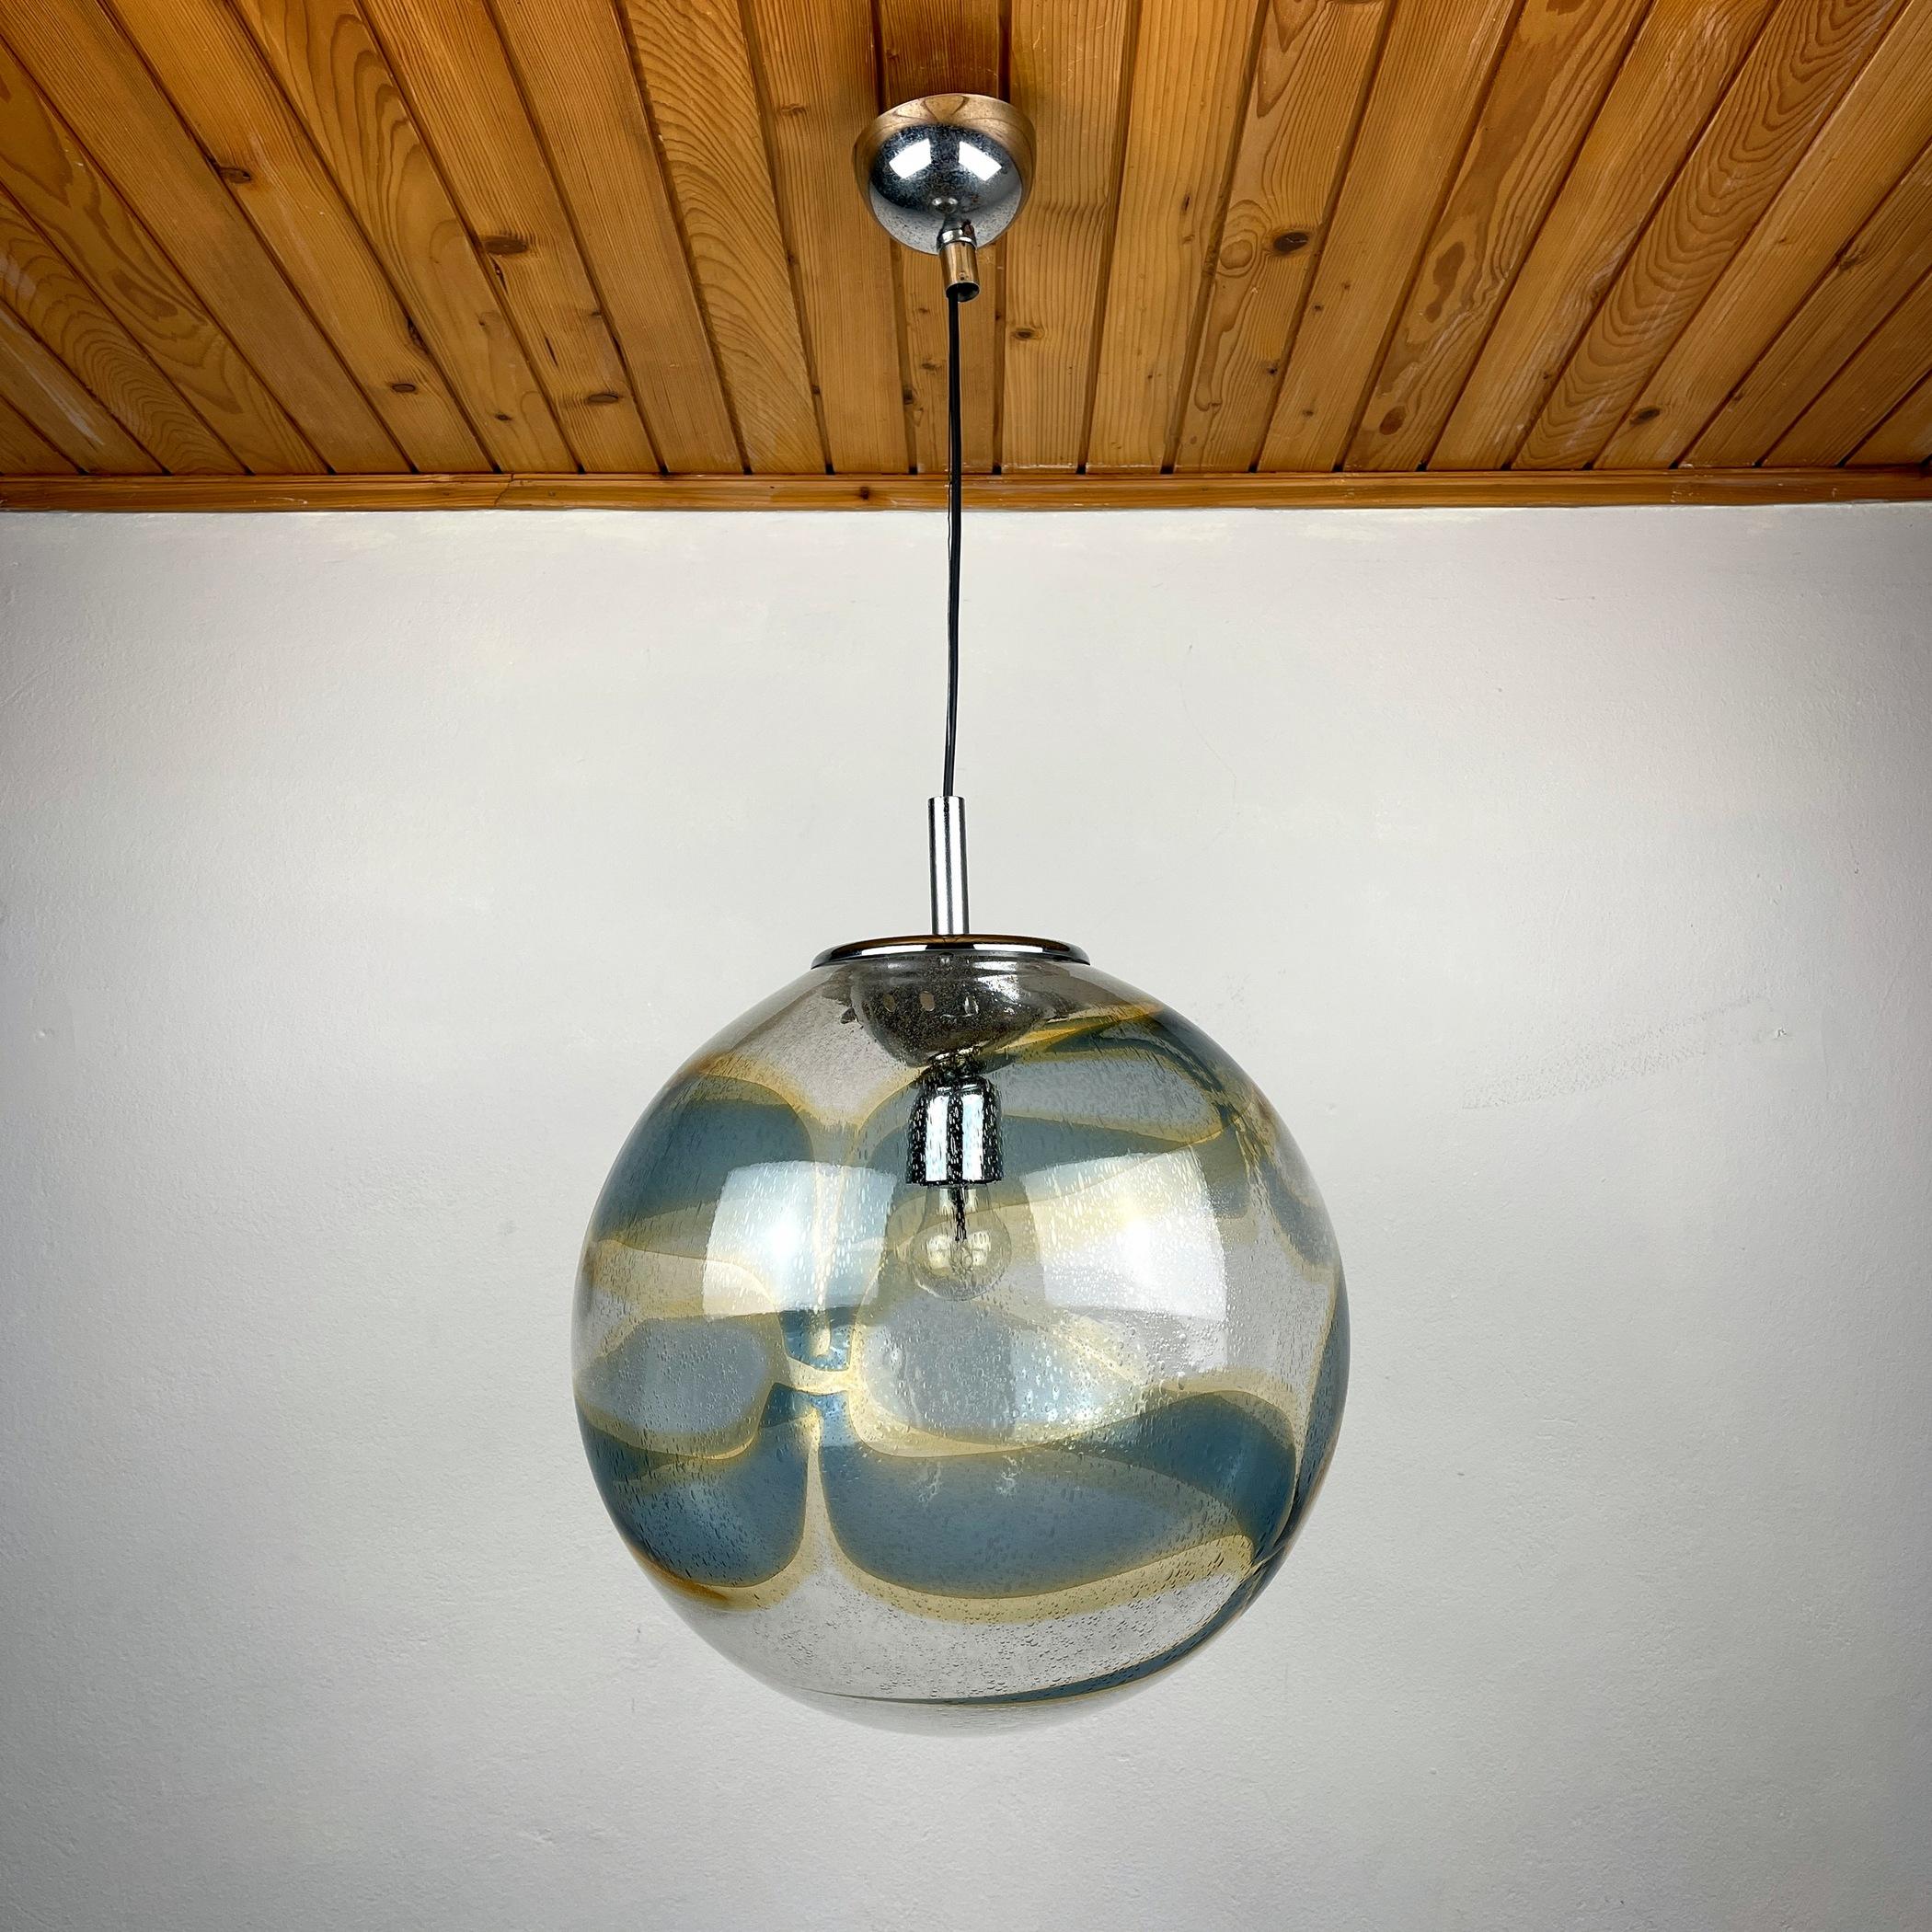 Vintage Xl Swirled Murano Glass Pendant Lamp by Vistosi Italy, 1970s For Sale 5